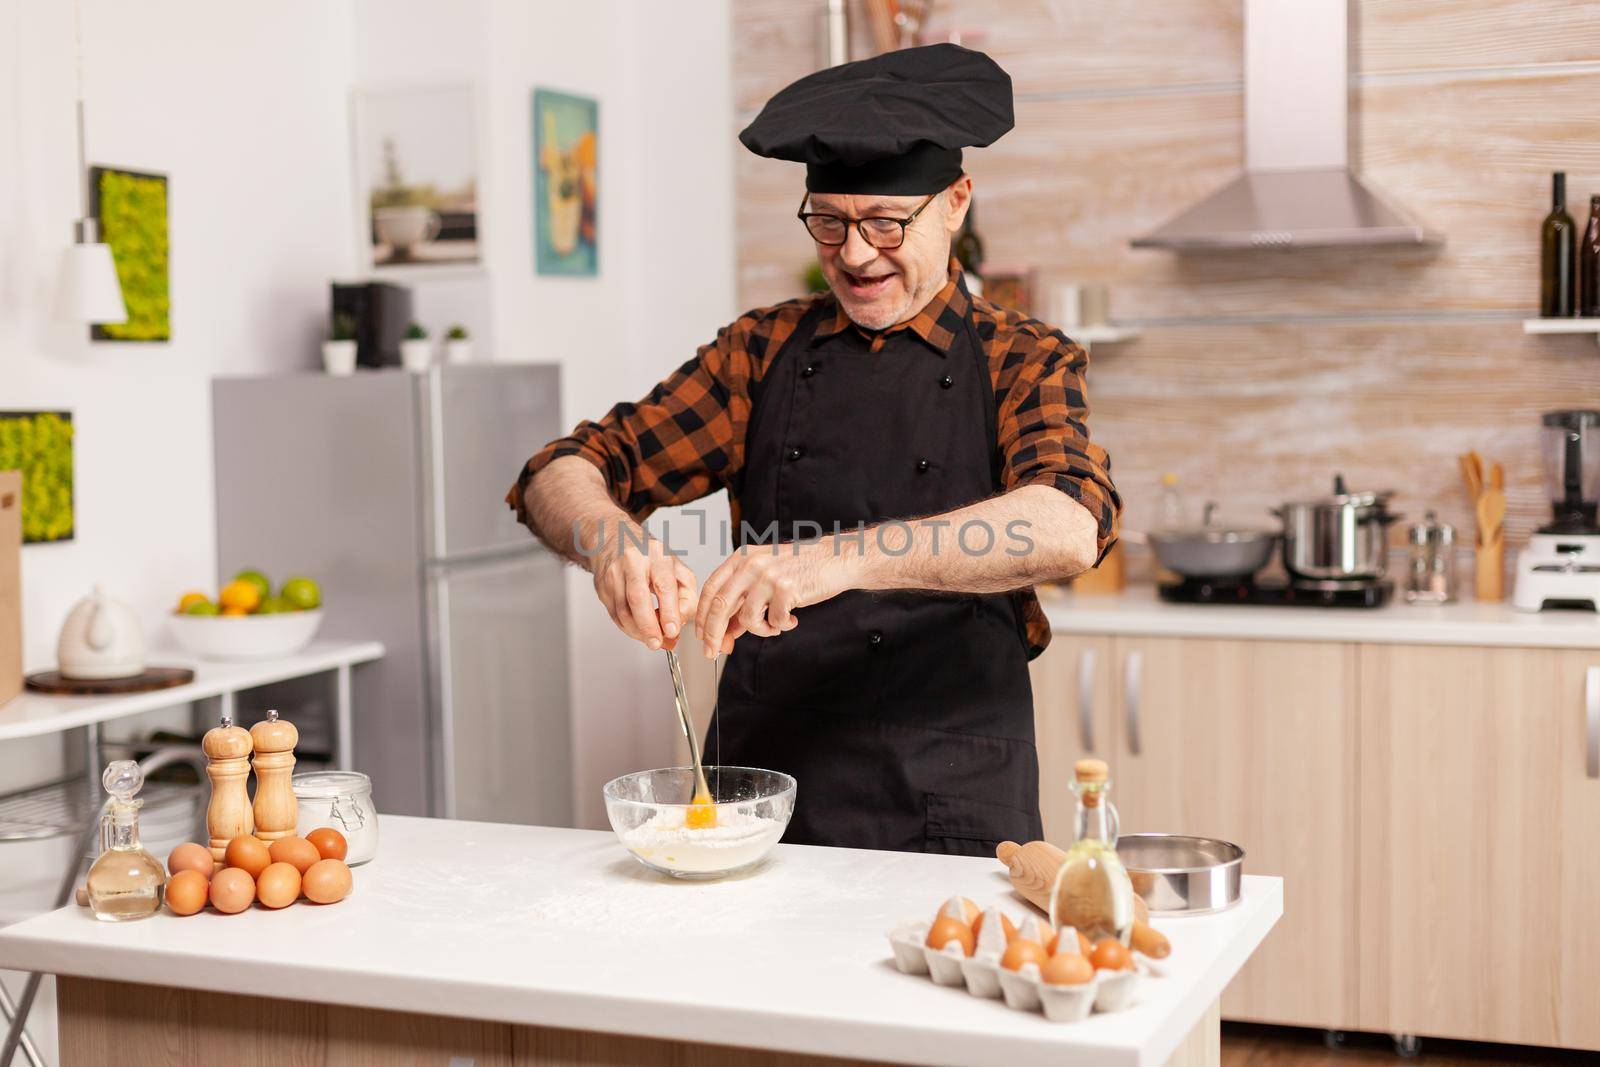 Retired chef cracking eggs for wheat flour in home kitchen. Elderly pastry chef cracking egg on glass bowl for cake recipe in kitchen, mixing by hand, kneading.